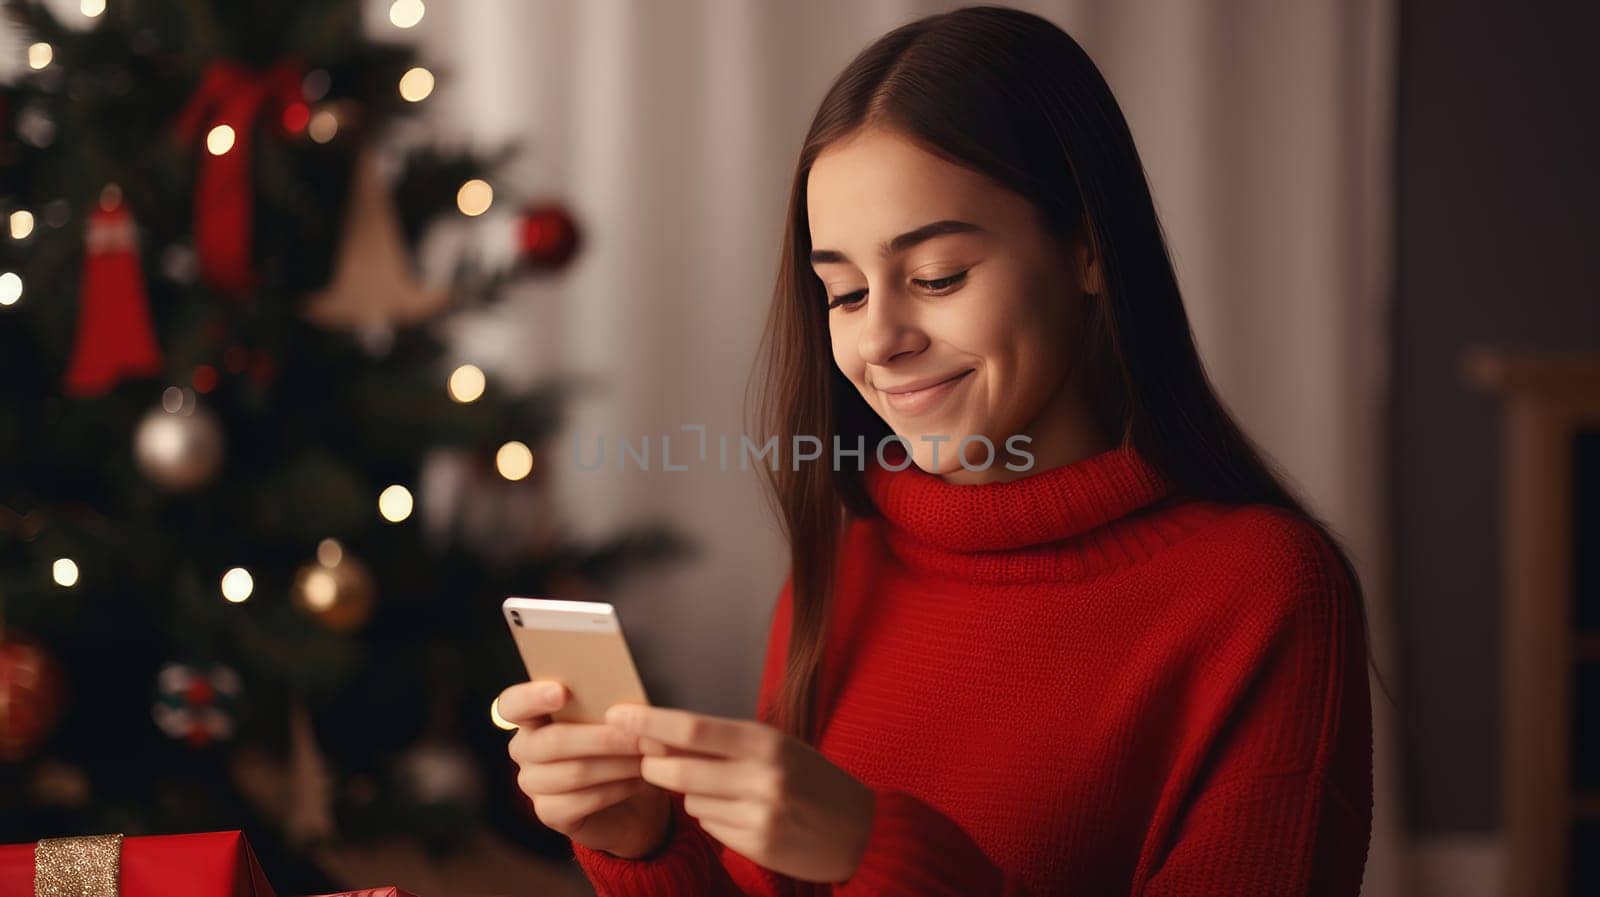 Young woman orders New Year gifts during Christmas holidays at home using smartphone and credit card.